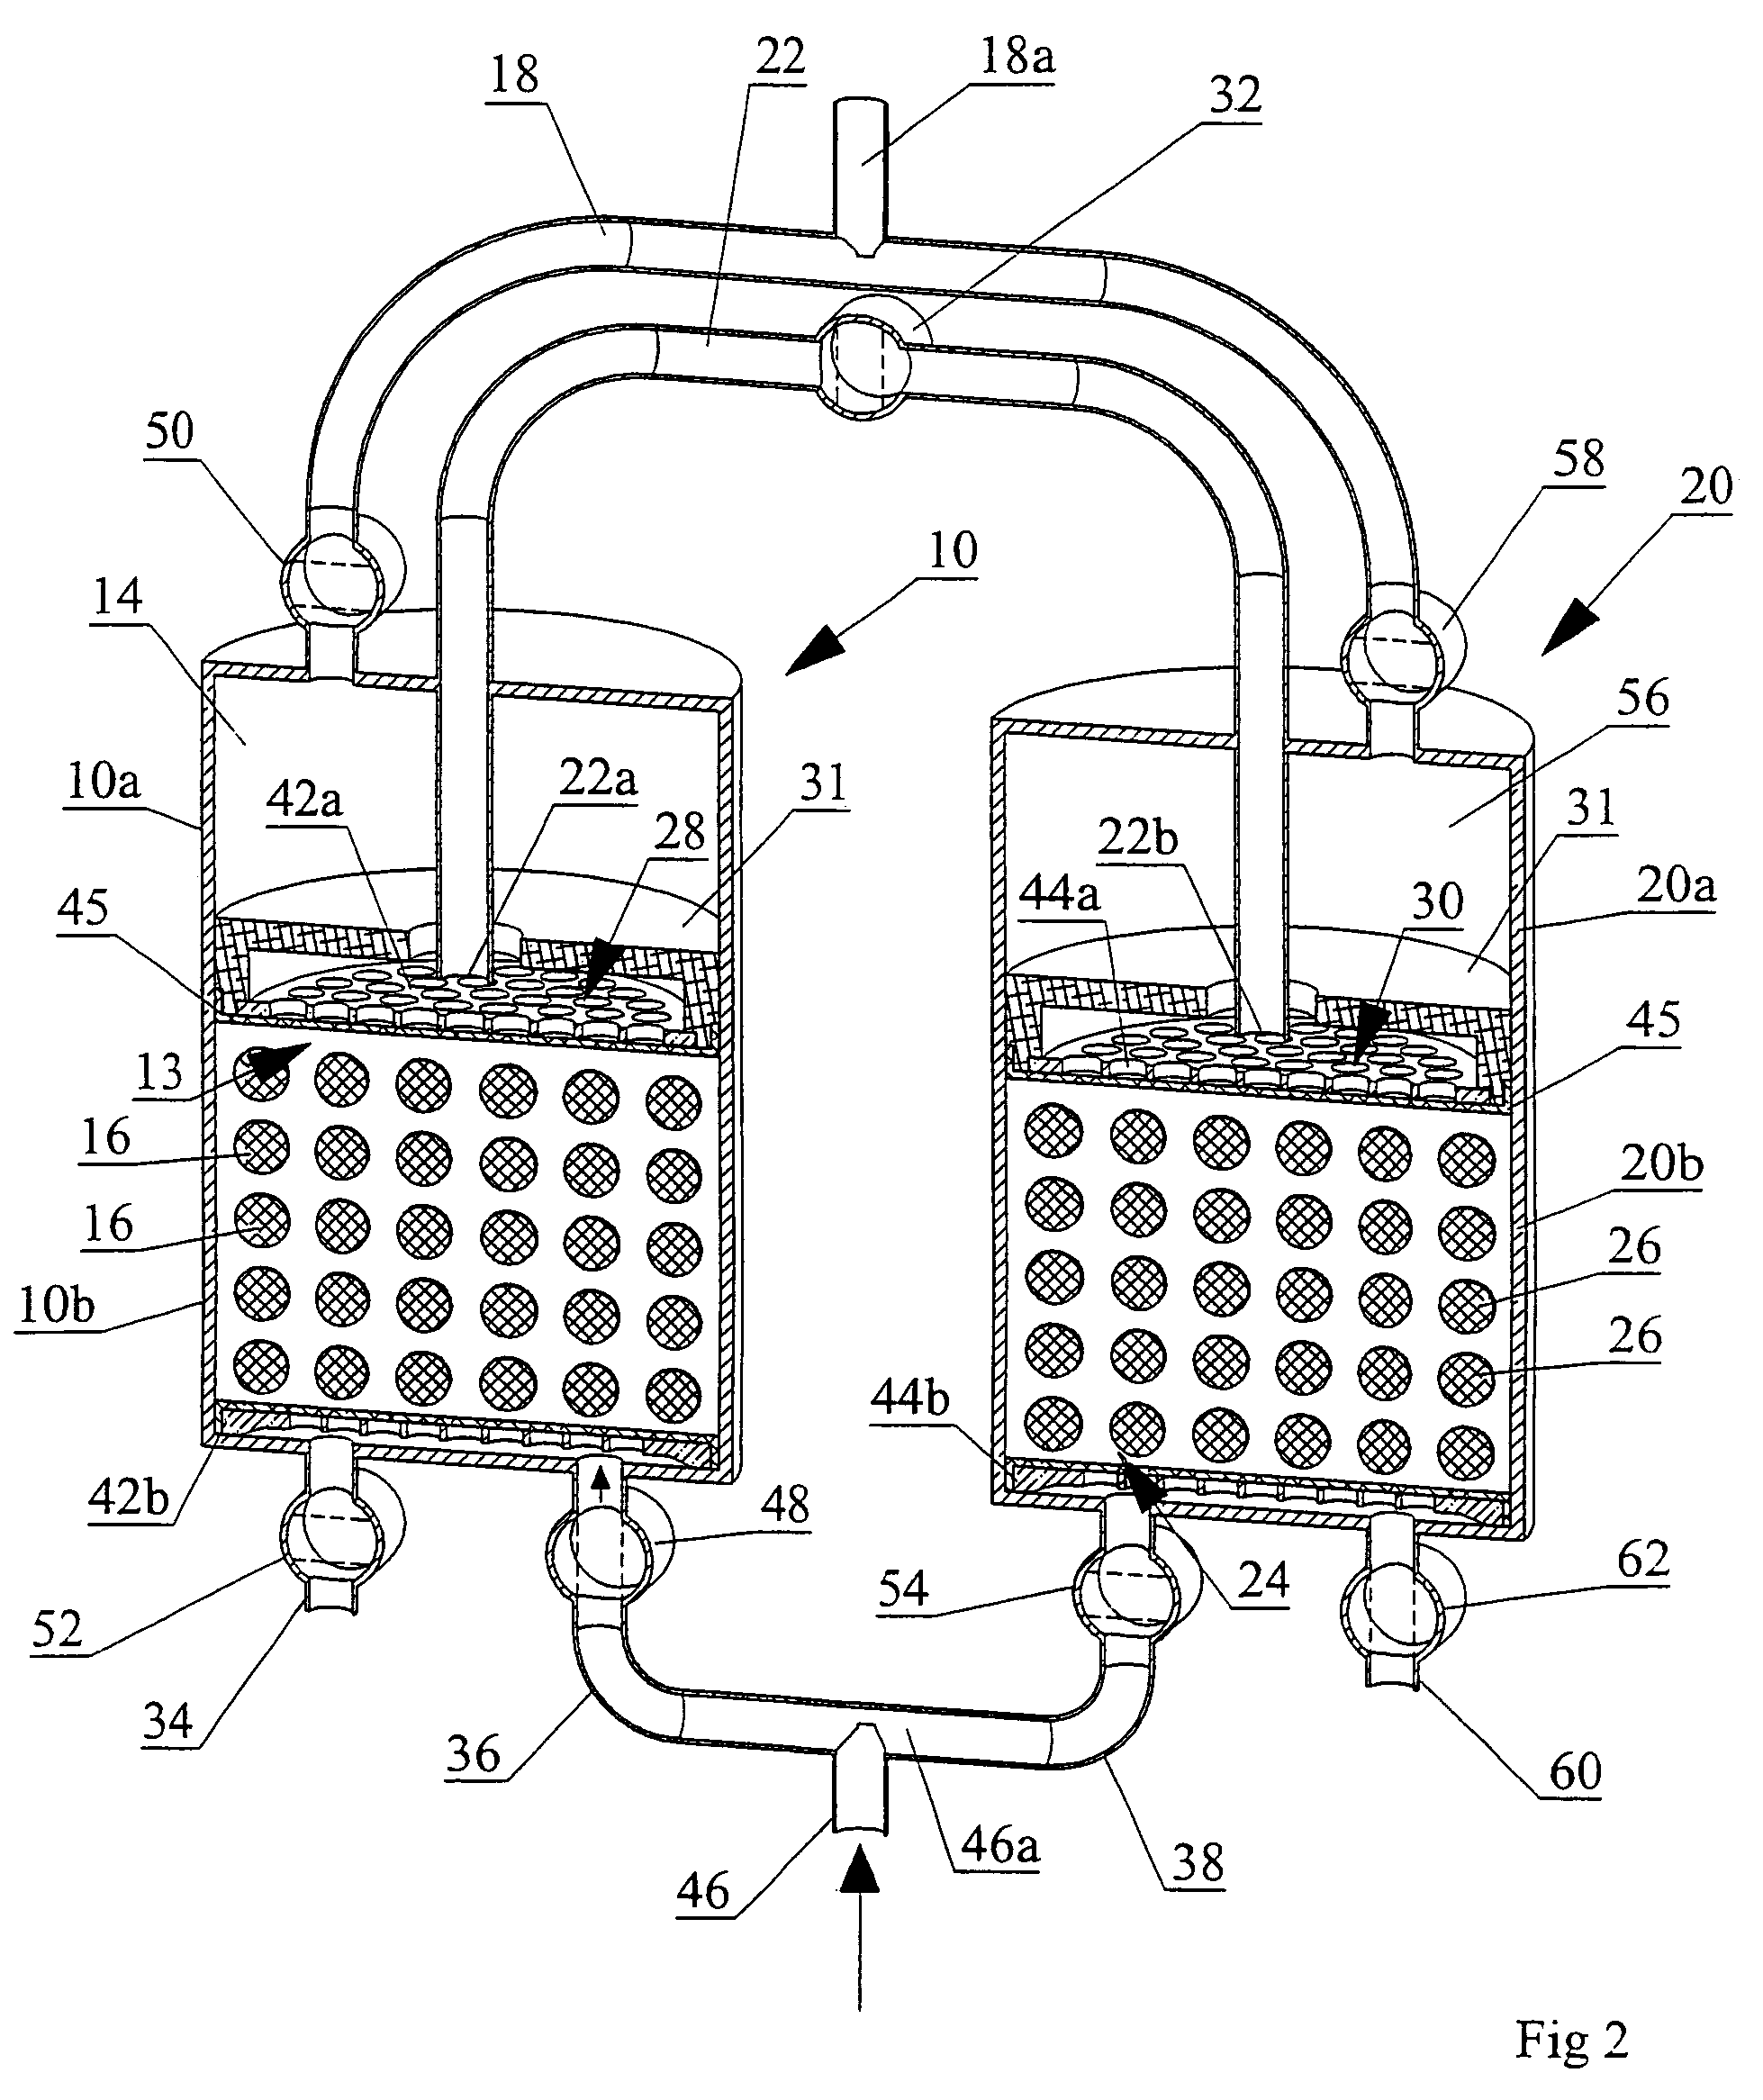 Process and apparatus for generating and delivering an enriched gas fraction